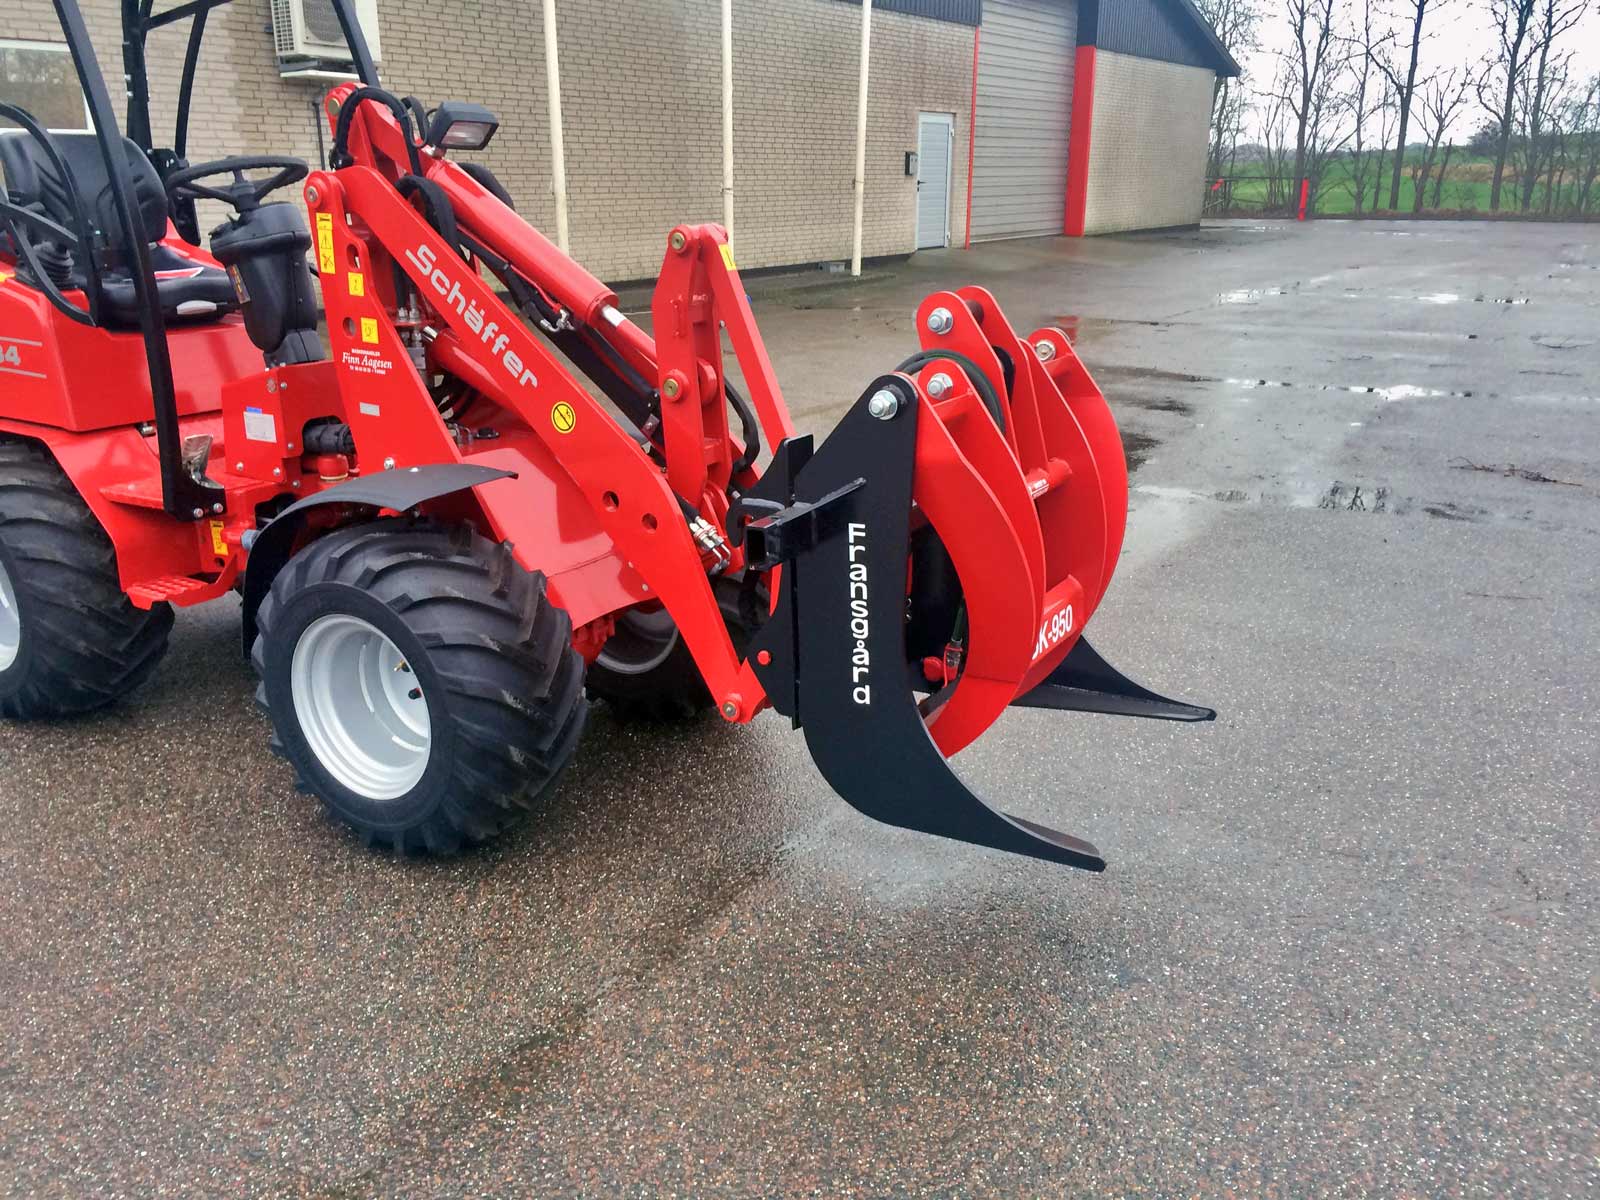 fransgard sk950 grapple on red tractor